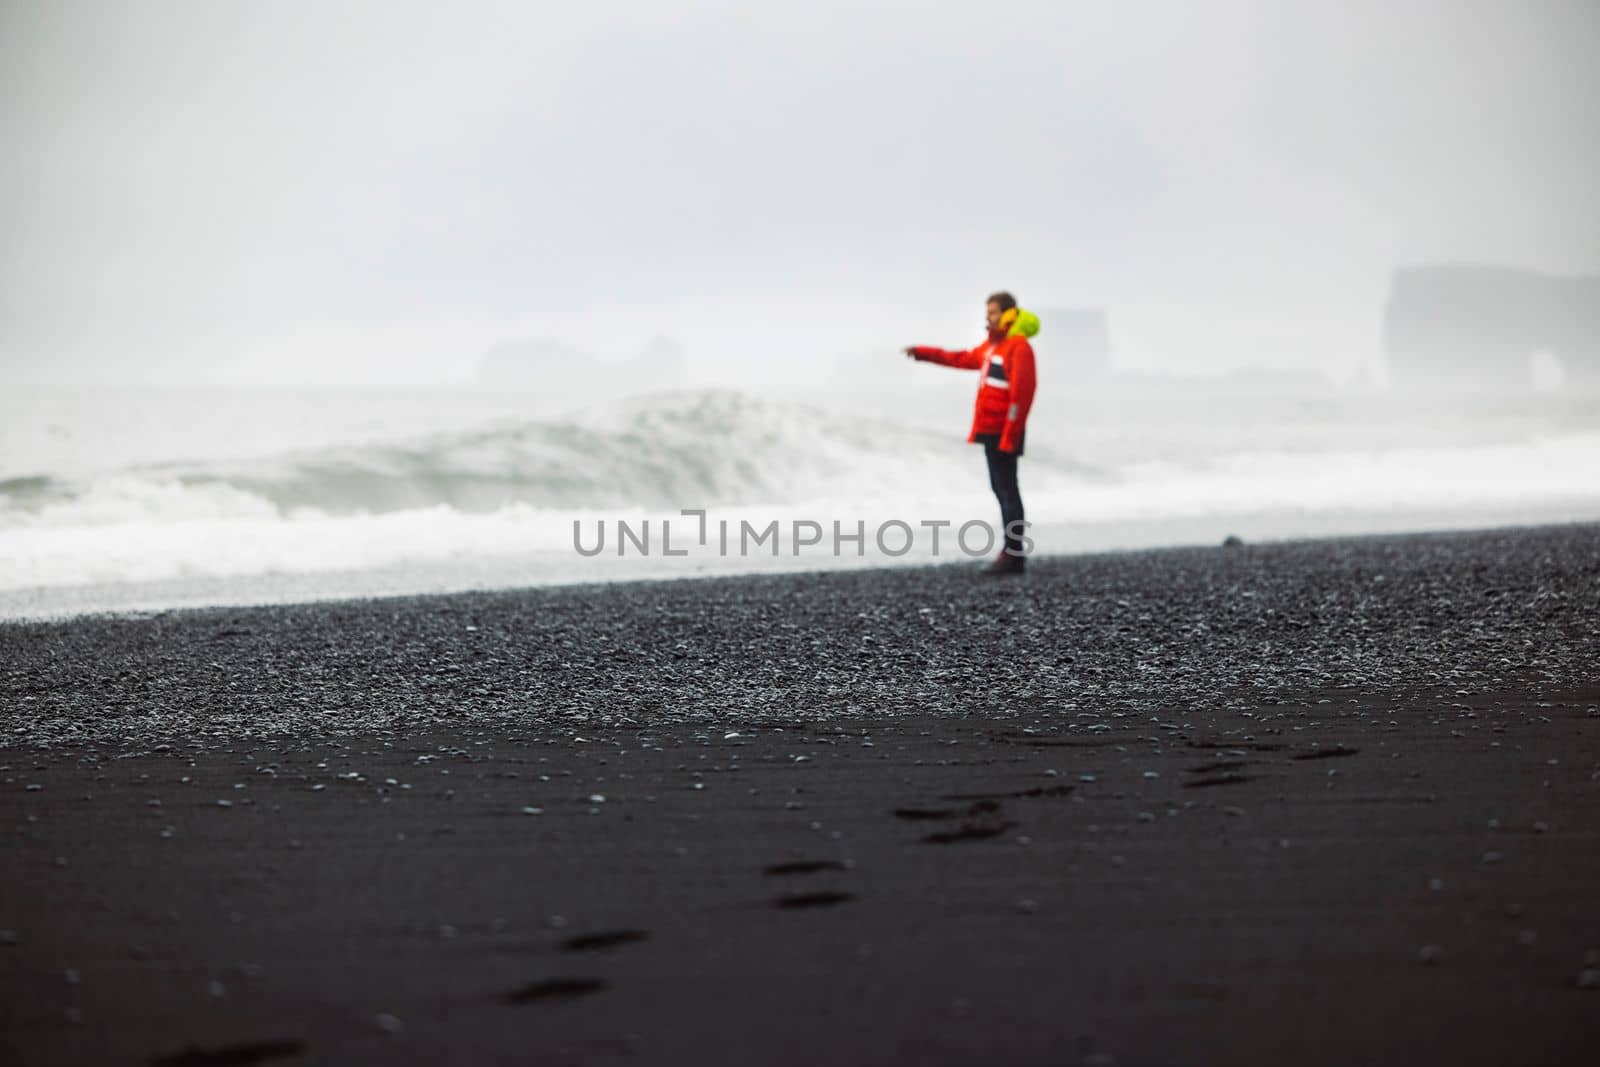 The man in waterproof jacket and pants standing on the beach with black volcanic sand, Reynisfjara, south of Iceland. Icelandic nature, Atlantic Ocean shore, seaside. High quality photo